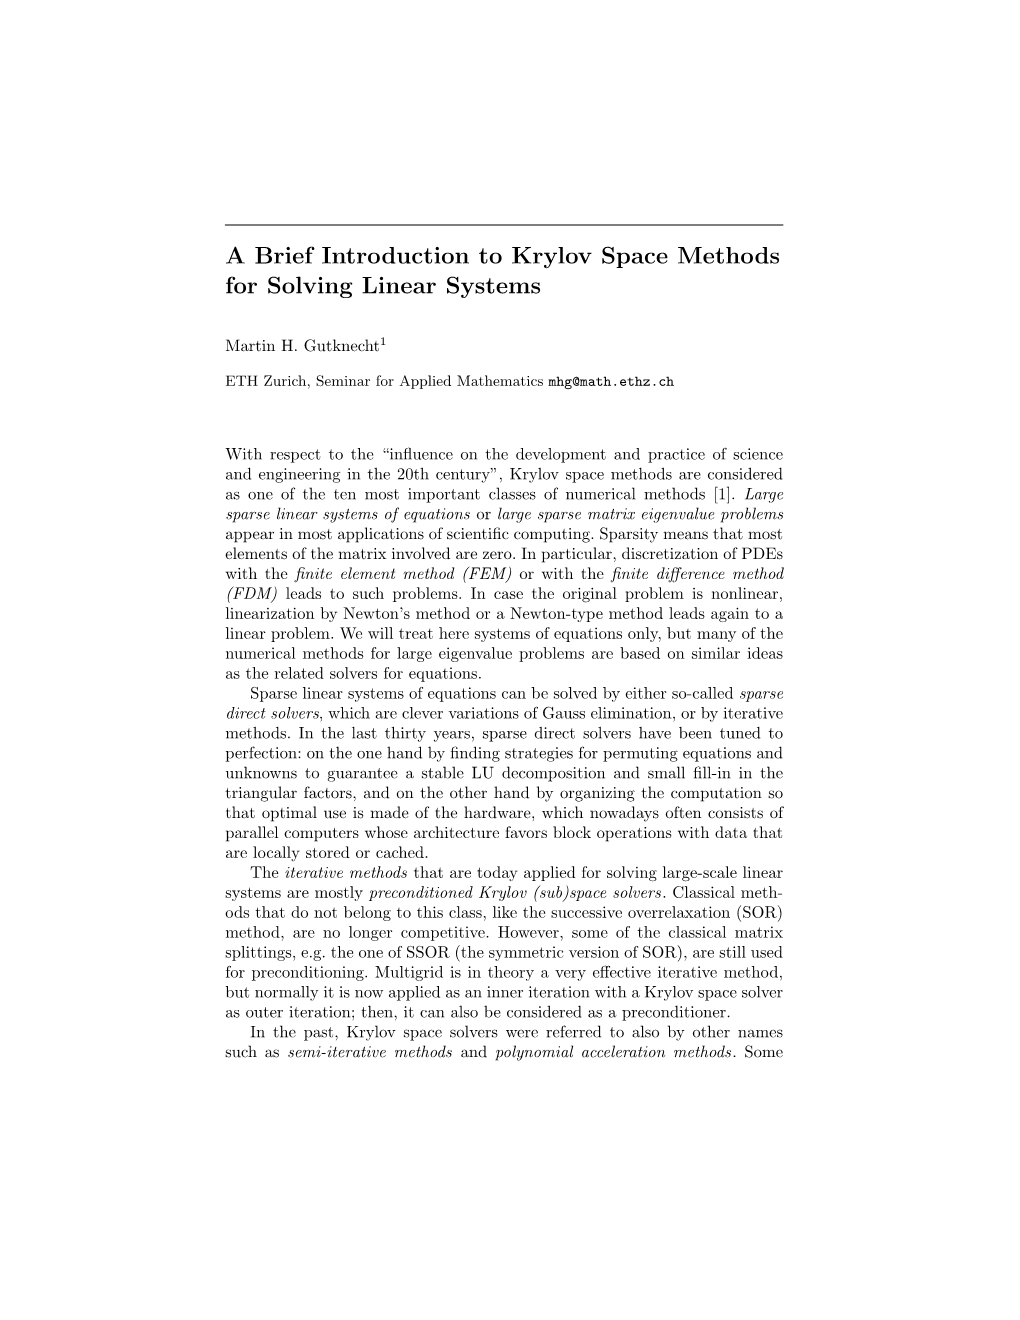 A Brief Introduction to Krylov Space Methods for Solving Linear Systems